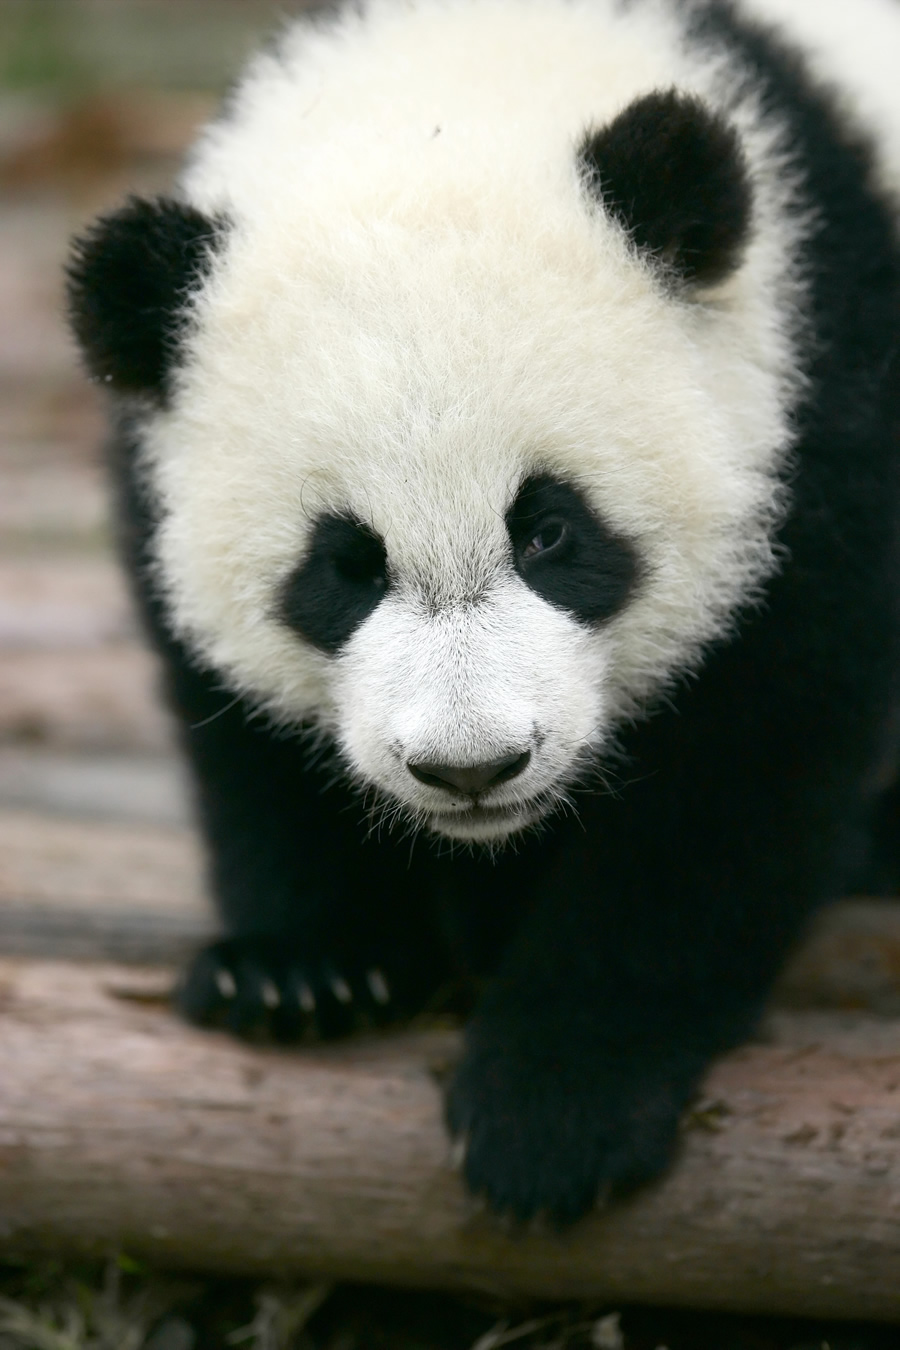 You can find photos of Giant Pandas taken in their natural habitats in China on the Smithsonian WILD website.